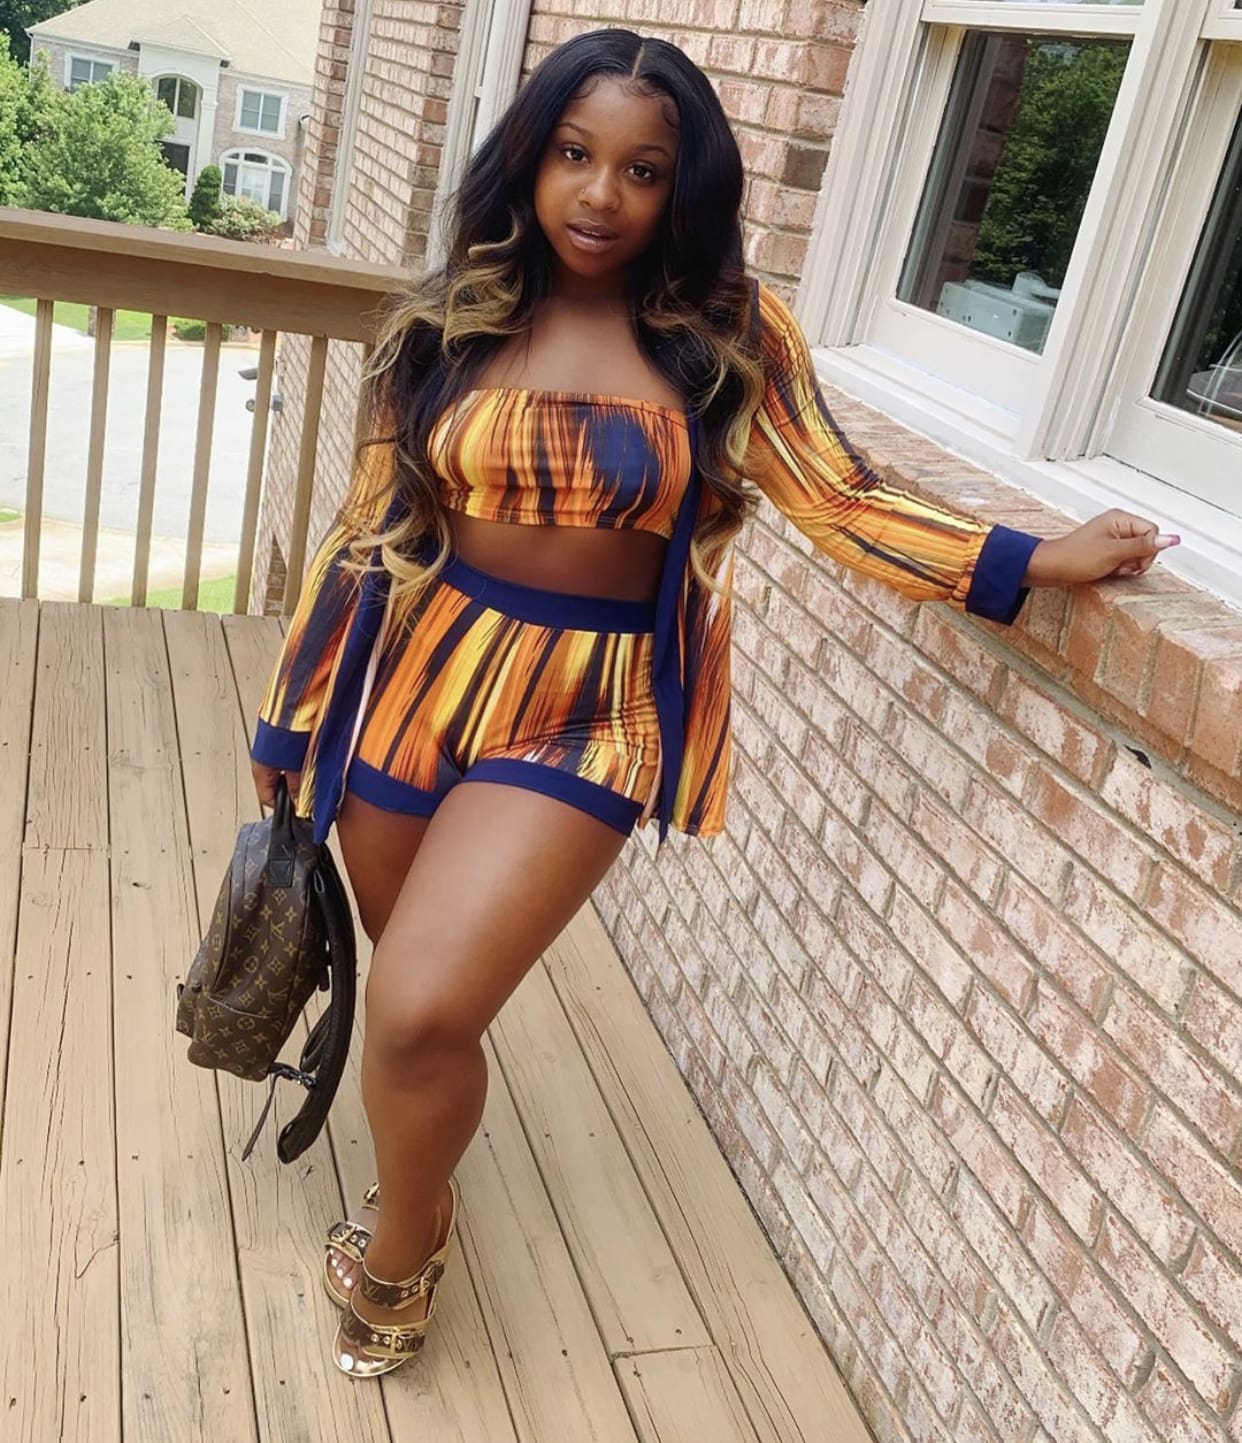 Reginae Carter Slays A New Hair Color - See Her Latest Look That Fans Are Praising